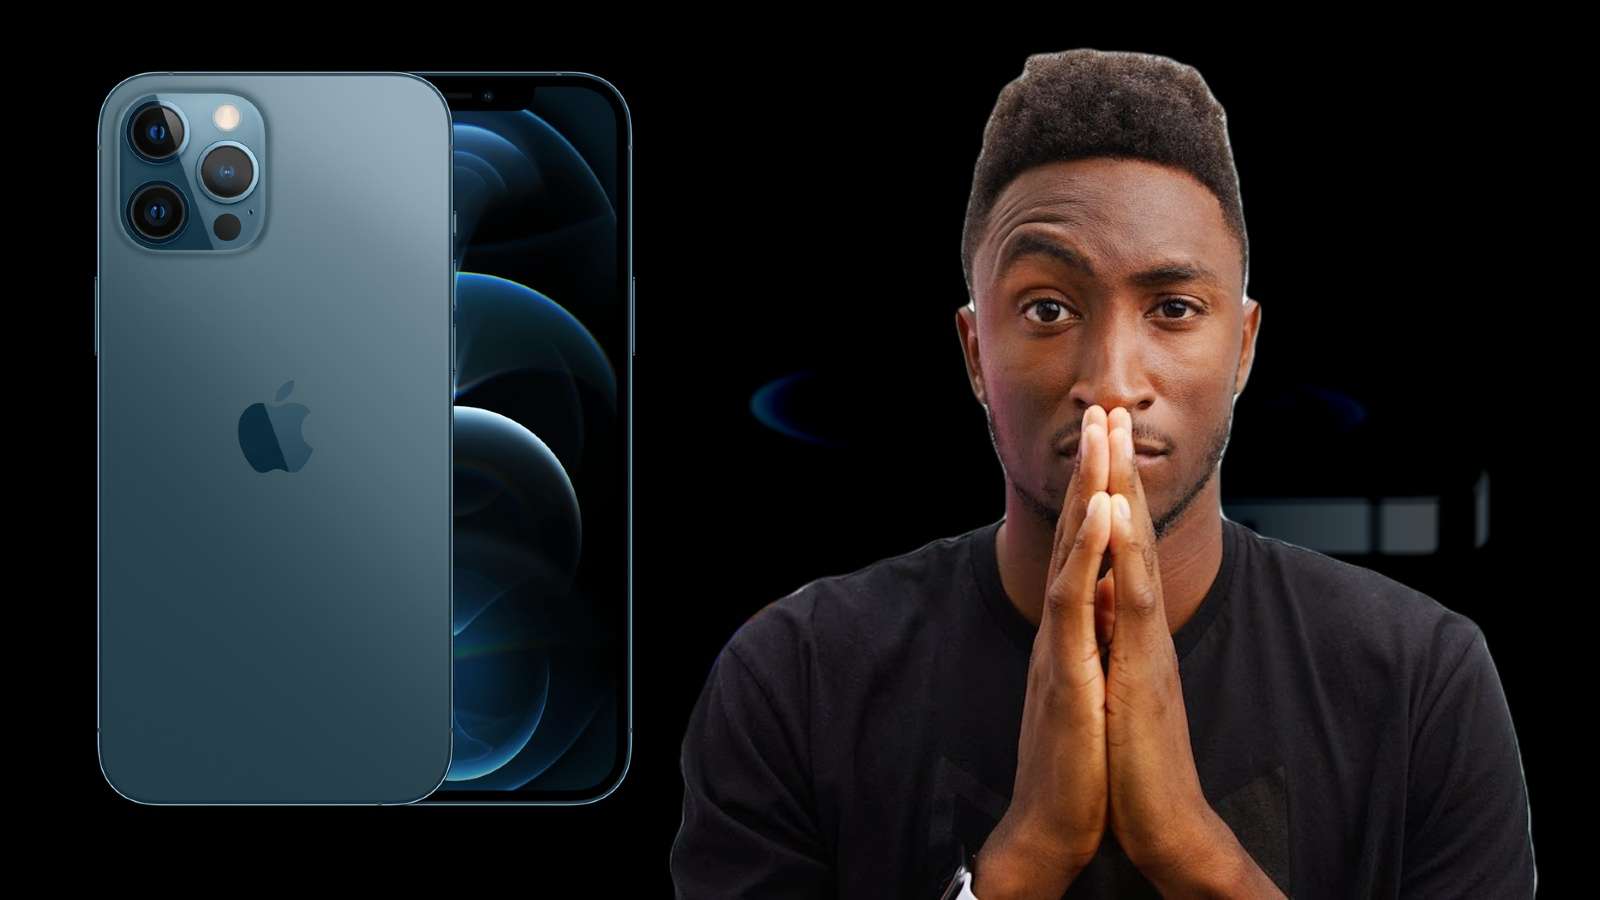 Marques Brownlee on iPhone 12 Pro Max